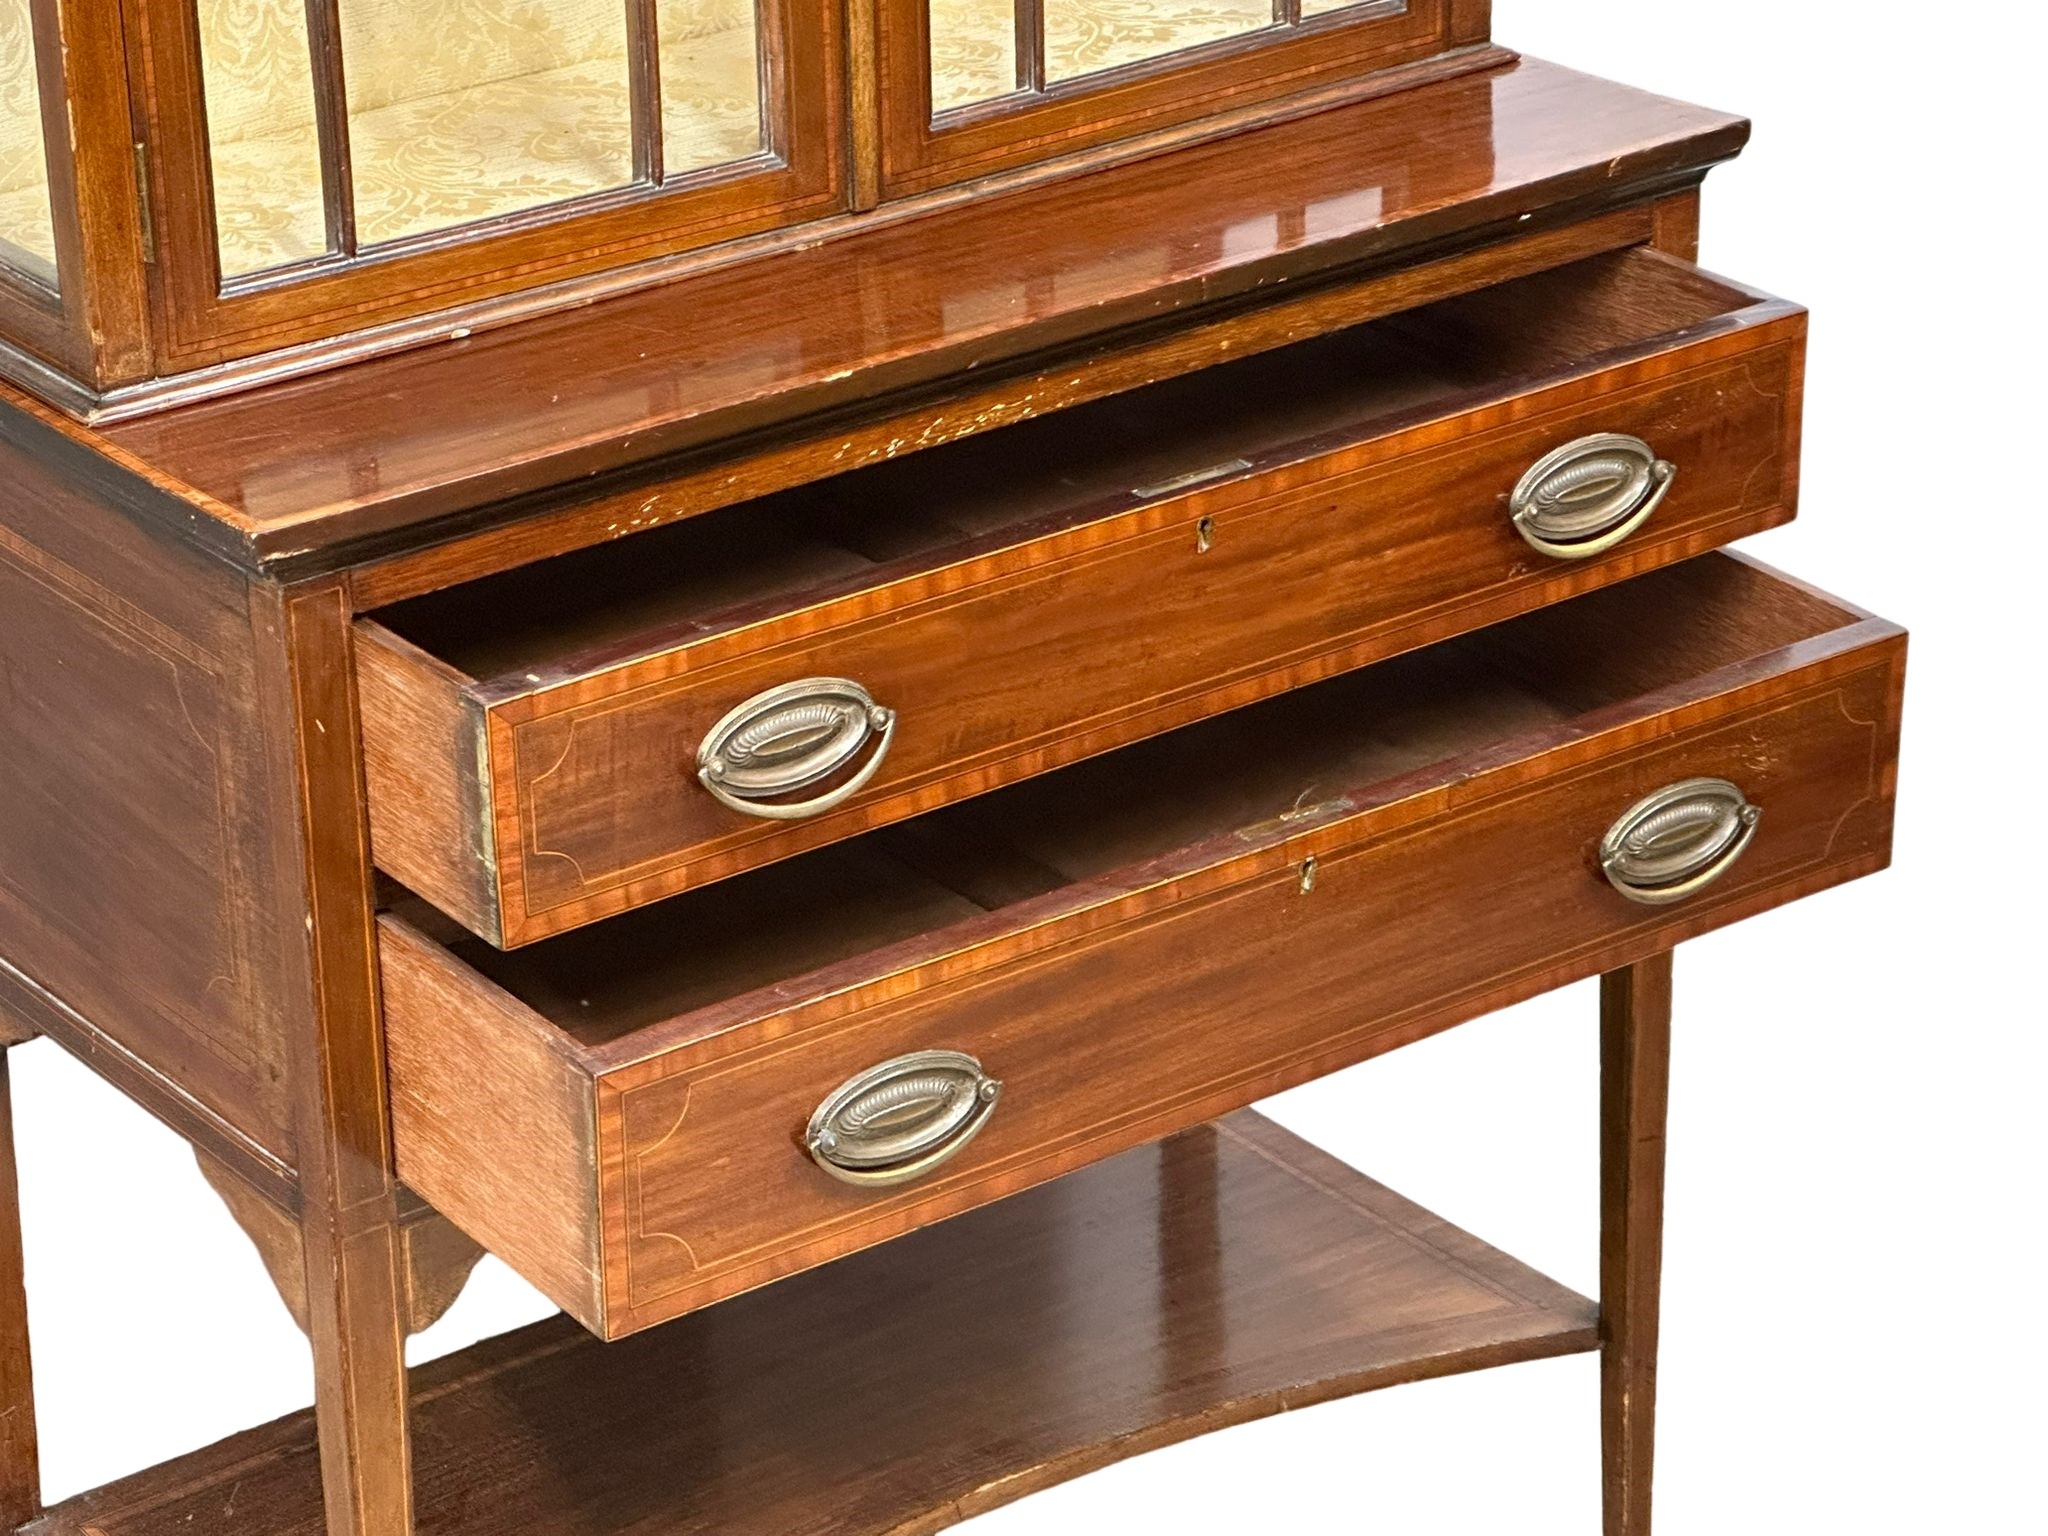 An Early 20th Century Sheraton Revival inlaid mahogany bookcase with 2 drawers. 83.5x42x183.5cm - Image 6 of 6